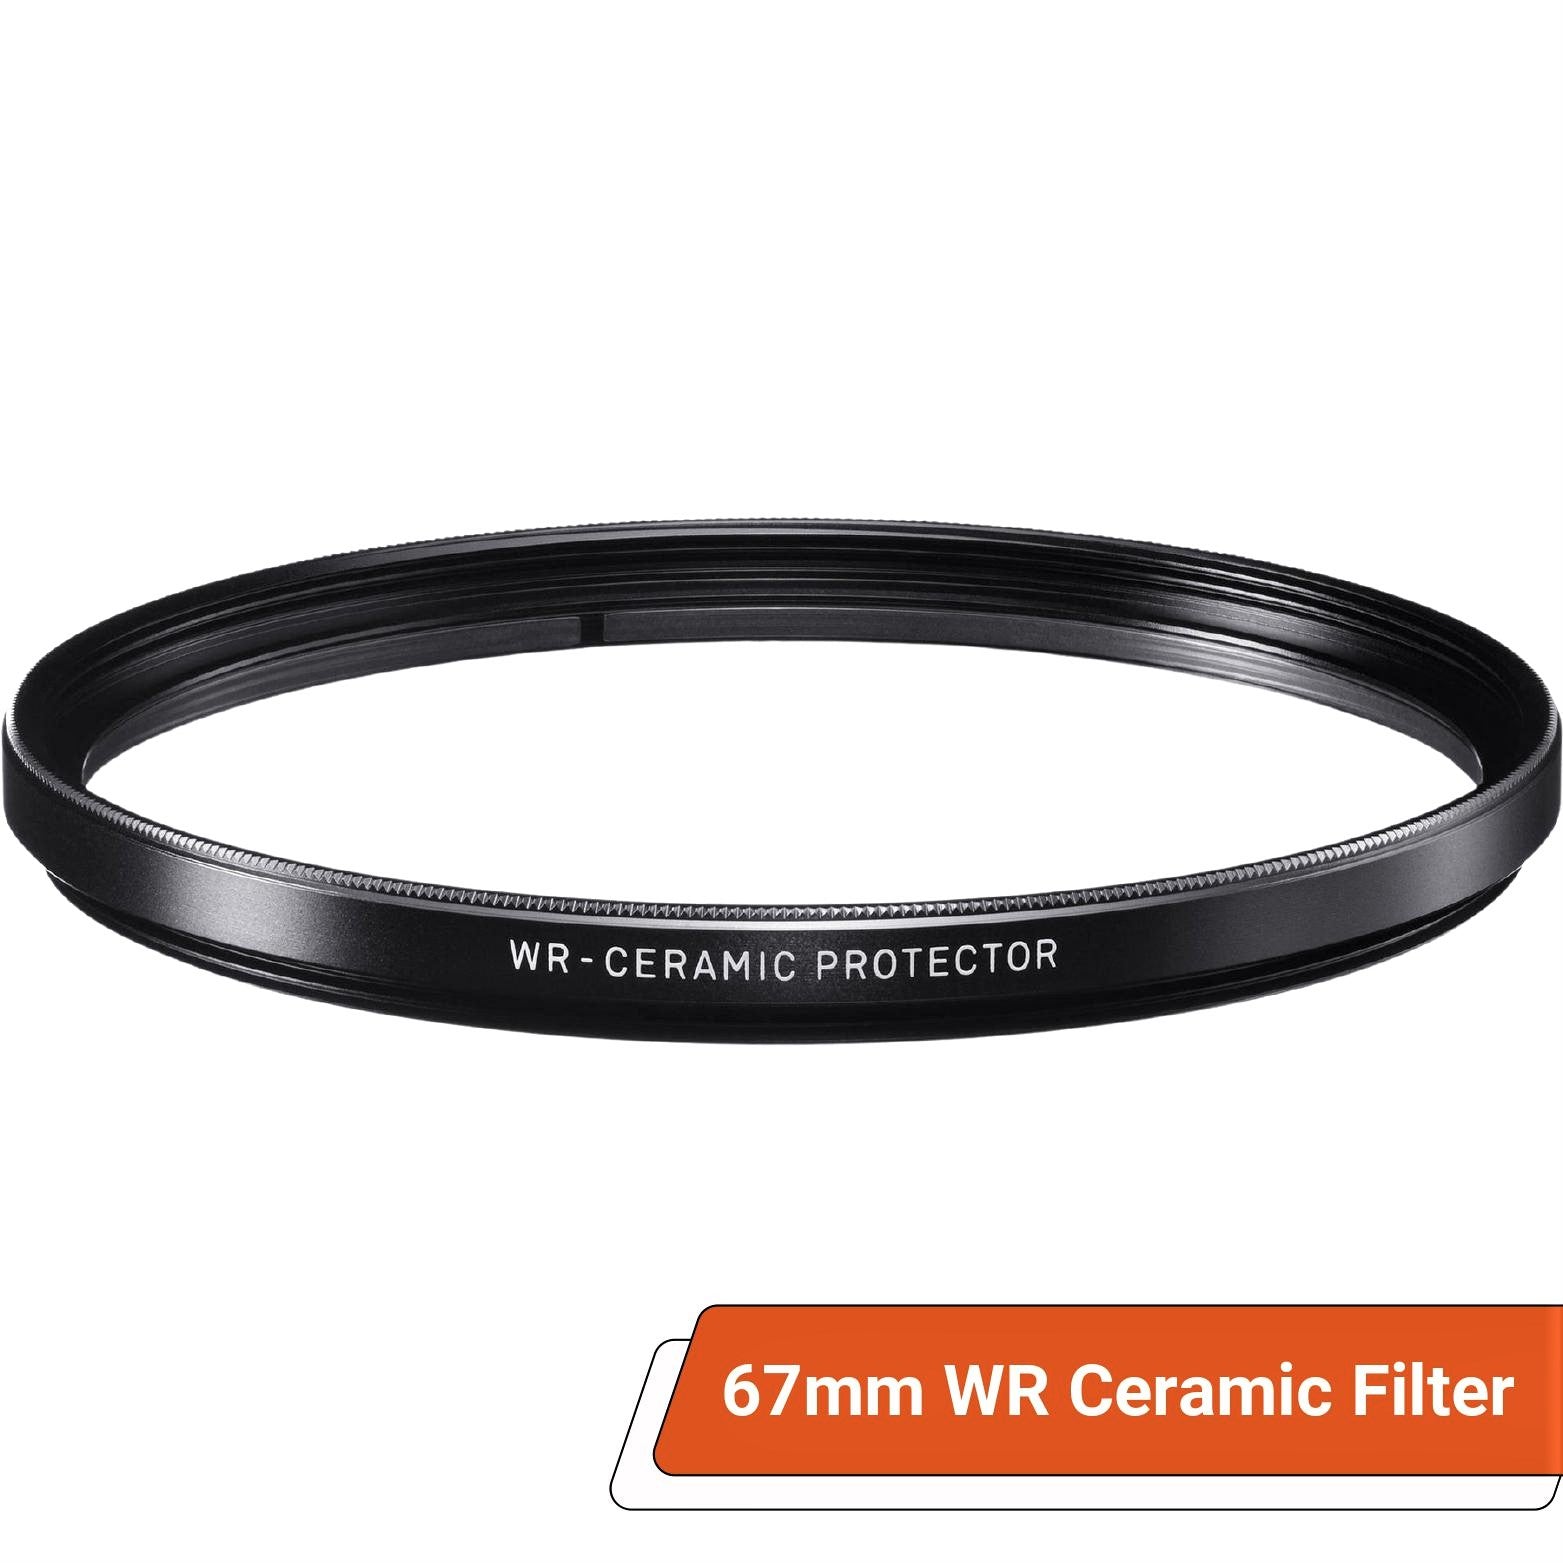 Sigma 67mm WR (Water Repellent) Ceramic Protector Filter